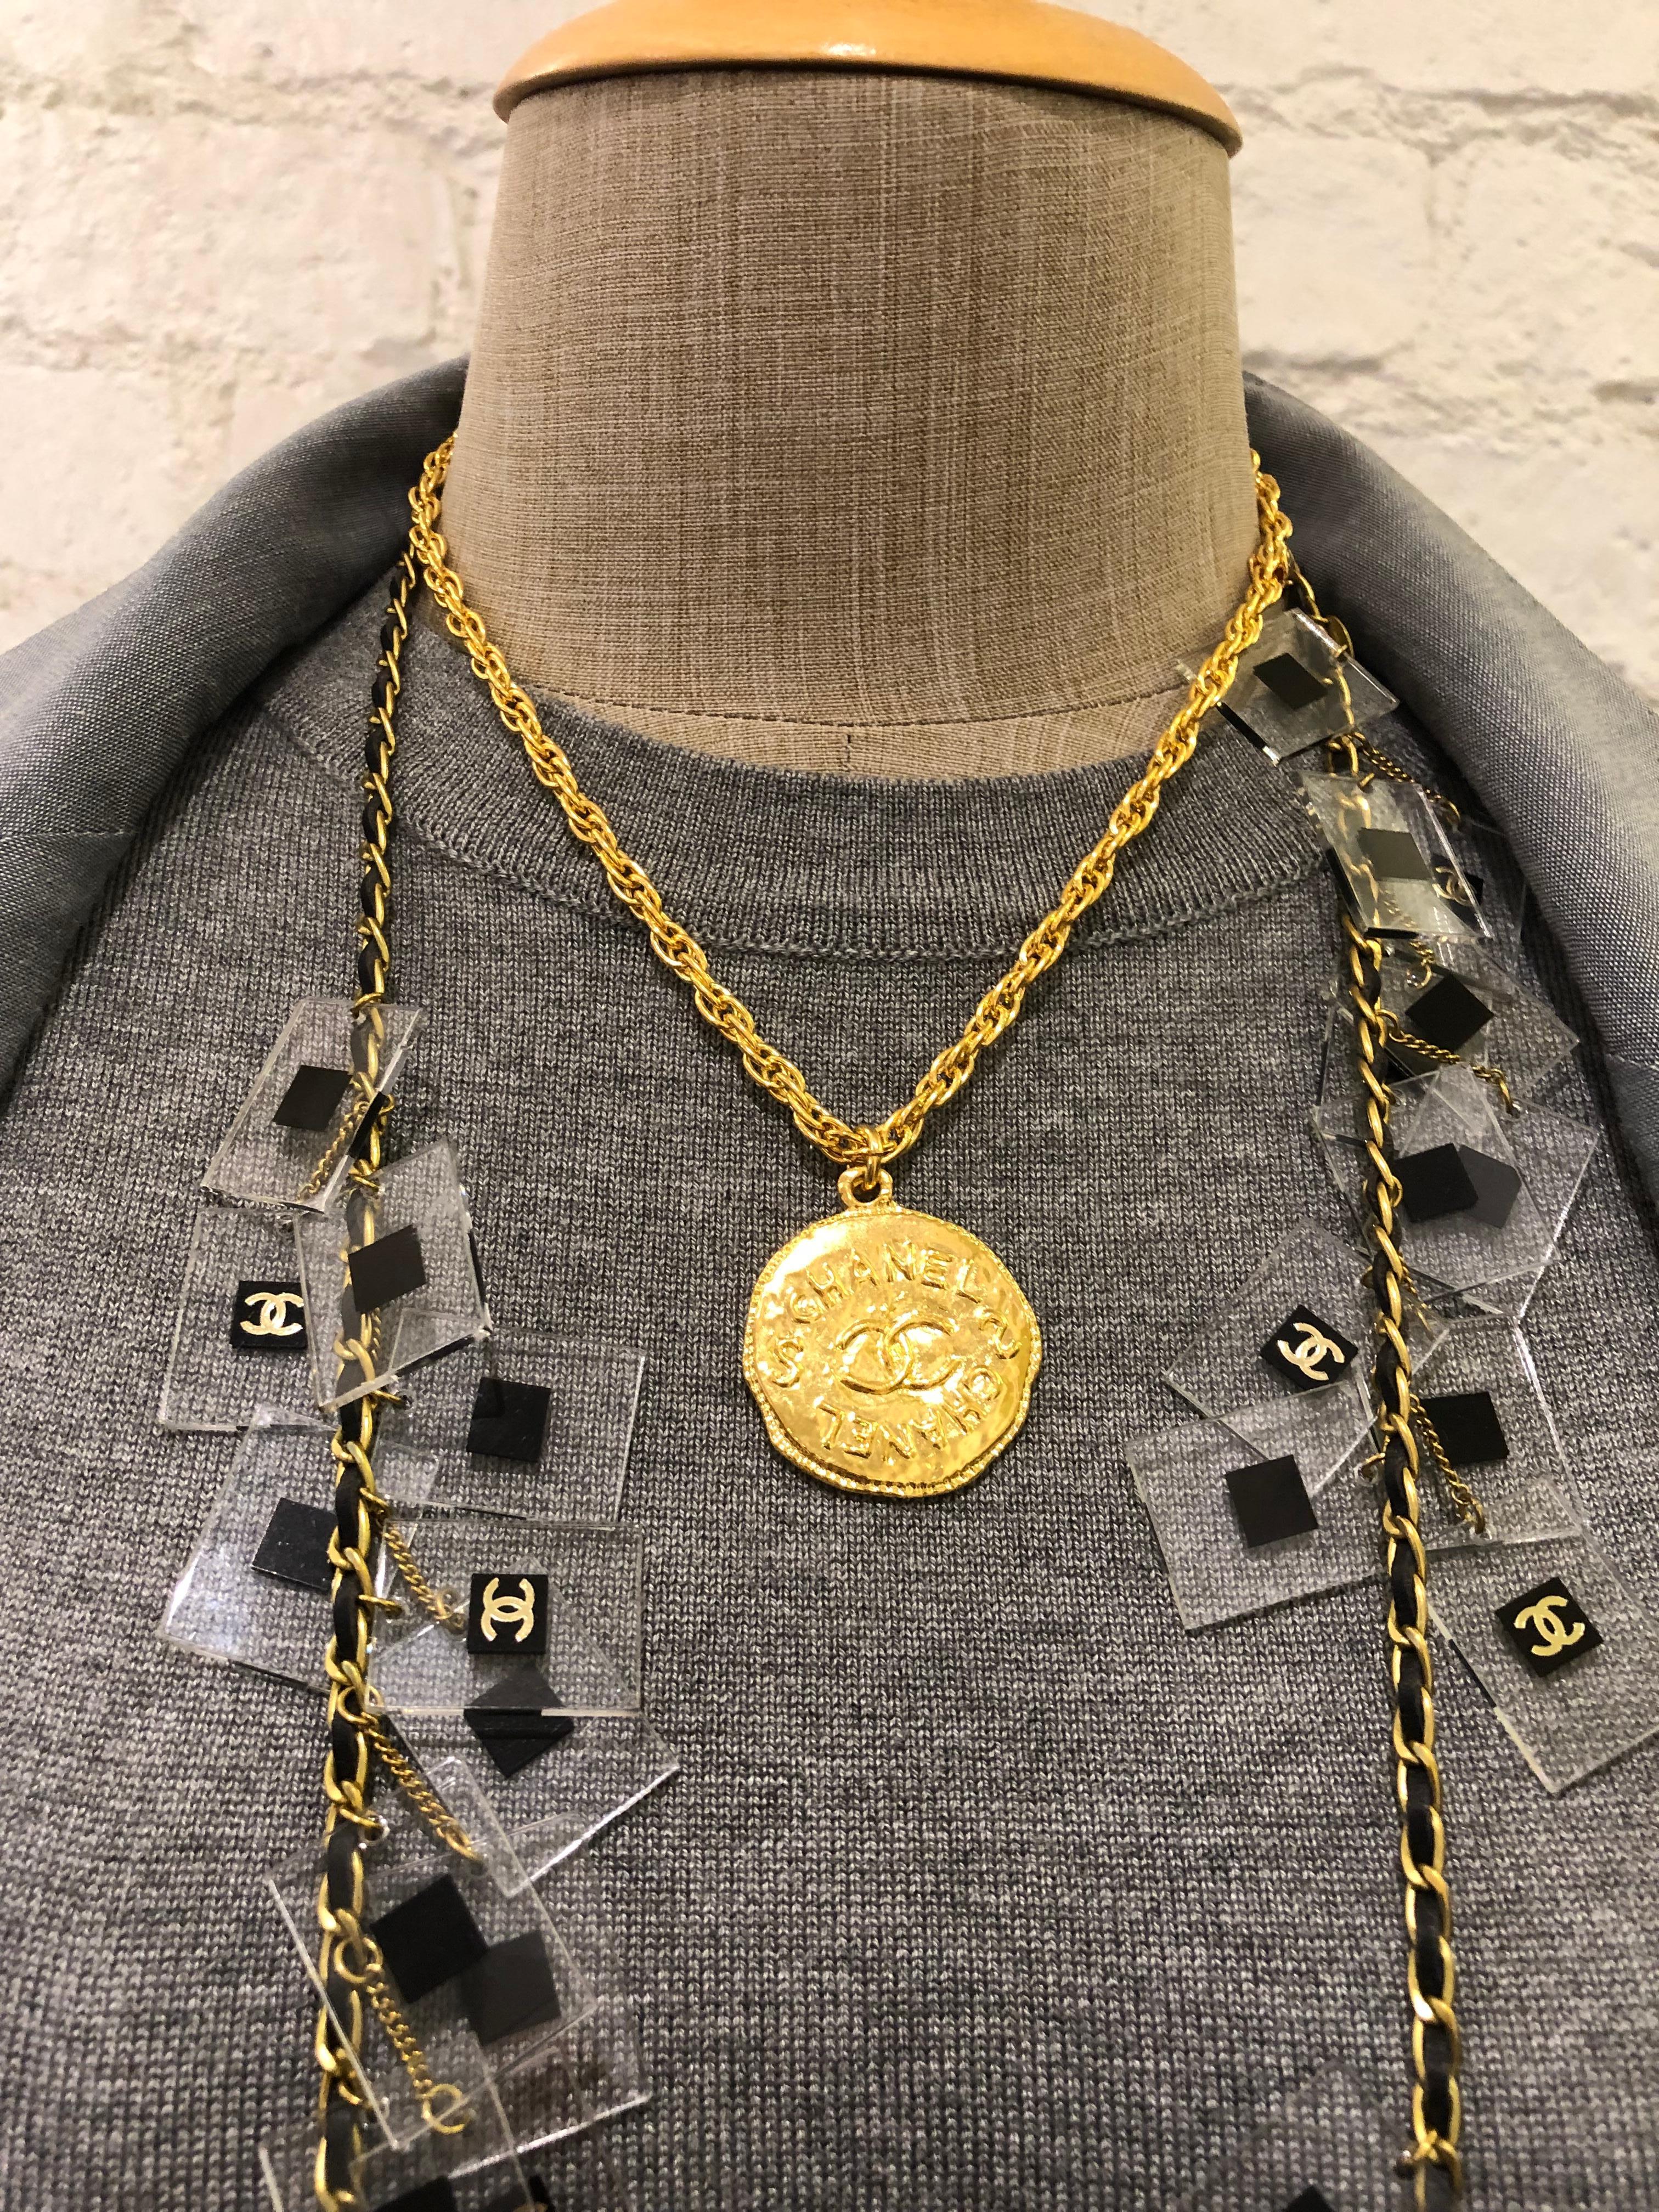 This vintage CHANEL short chain necklace is crafted of gold toned chain adorned with a Byzantine styled coin charm. Spring ring closure. Stamped 93P CHANEL made in France. Measures approximately 44 cm Charm diameter 3.3 cm.

Condition: Generally in